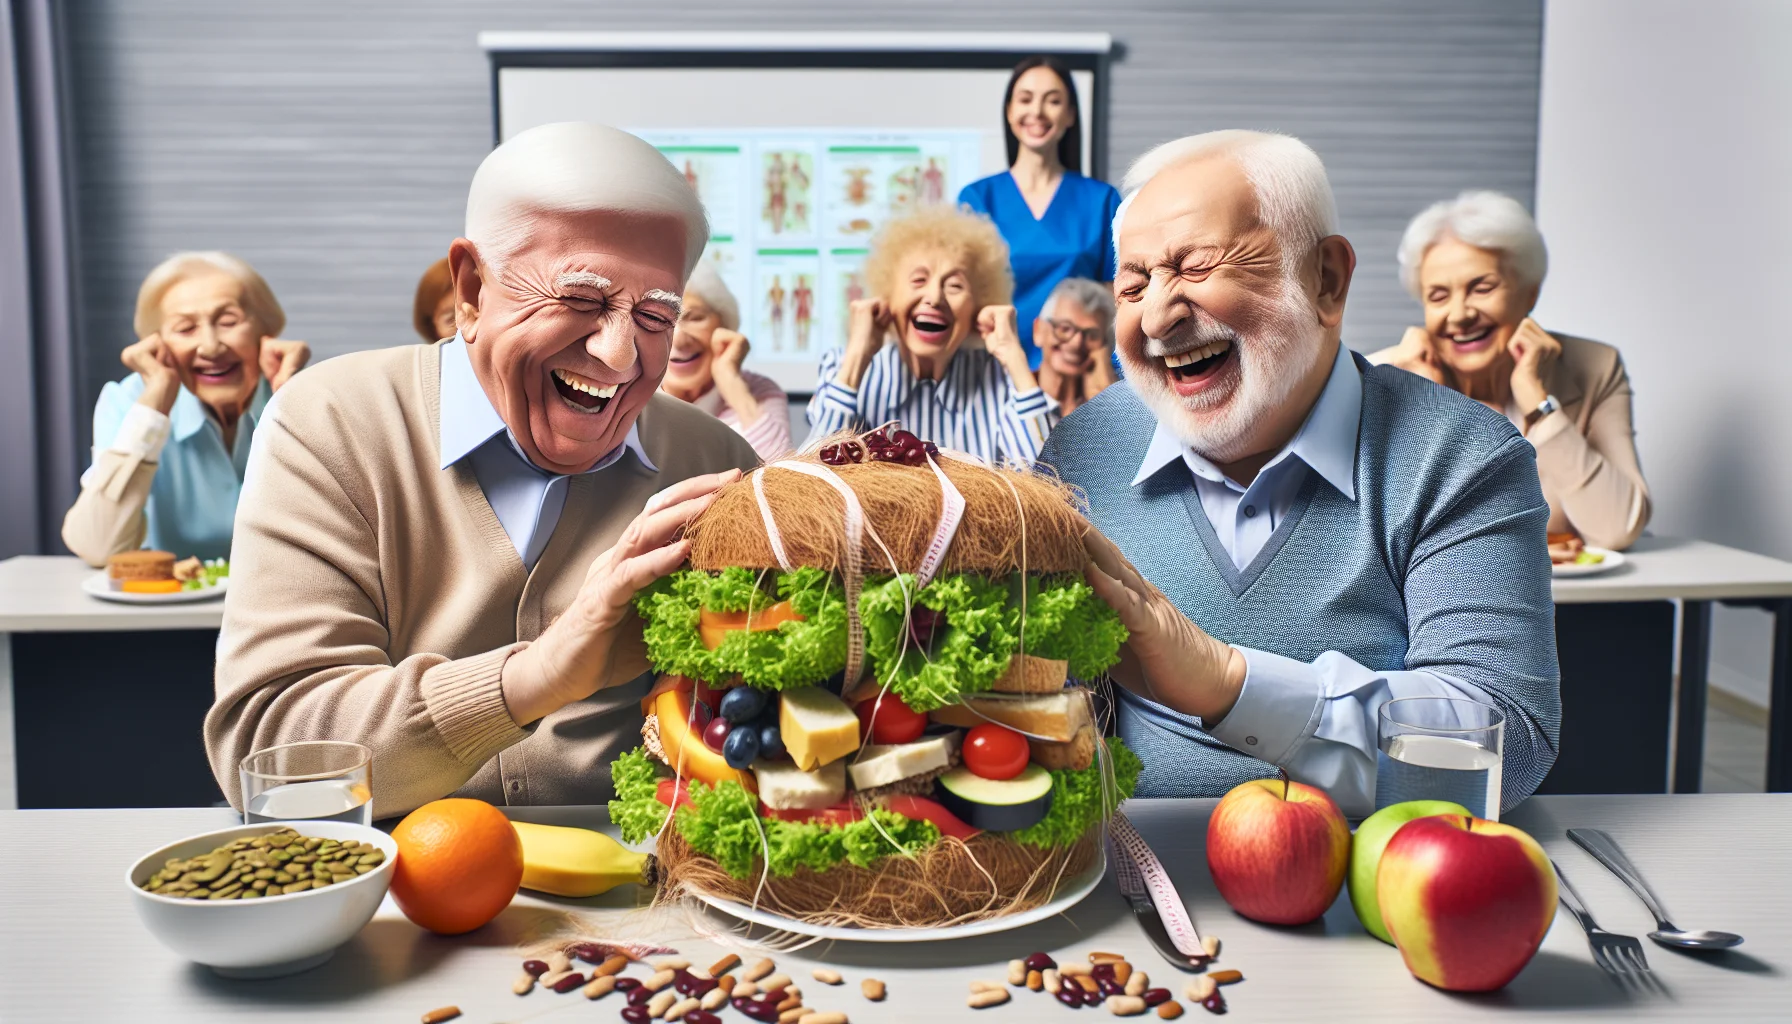 Imagine a humorous yet realistic scene of a lively senior nutrition class. It's lunch time and the elderly participants, a Caucasian gentleman and a Middle-Eastern lady, both cheerfully struggling to manage a huge sandwich overflowing with high-fiber foods like lettuce, fruits, whole grains, and beans. The atmosphere is heartening, evident by the laughter and smiley faces on everyone present, as they learn about healthy diets and the importance of high fiber foods in a light-hearted manner.